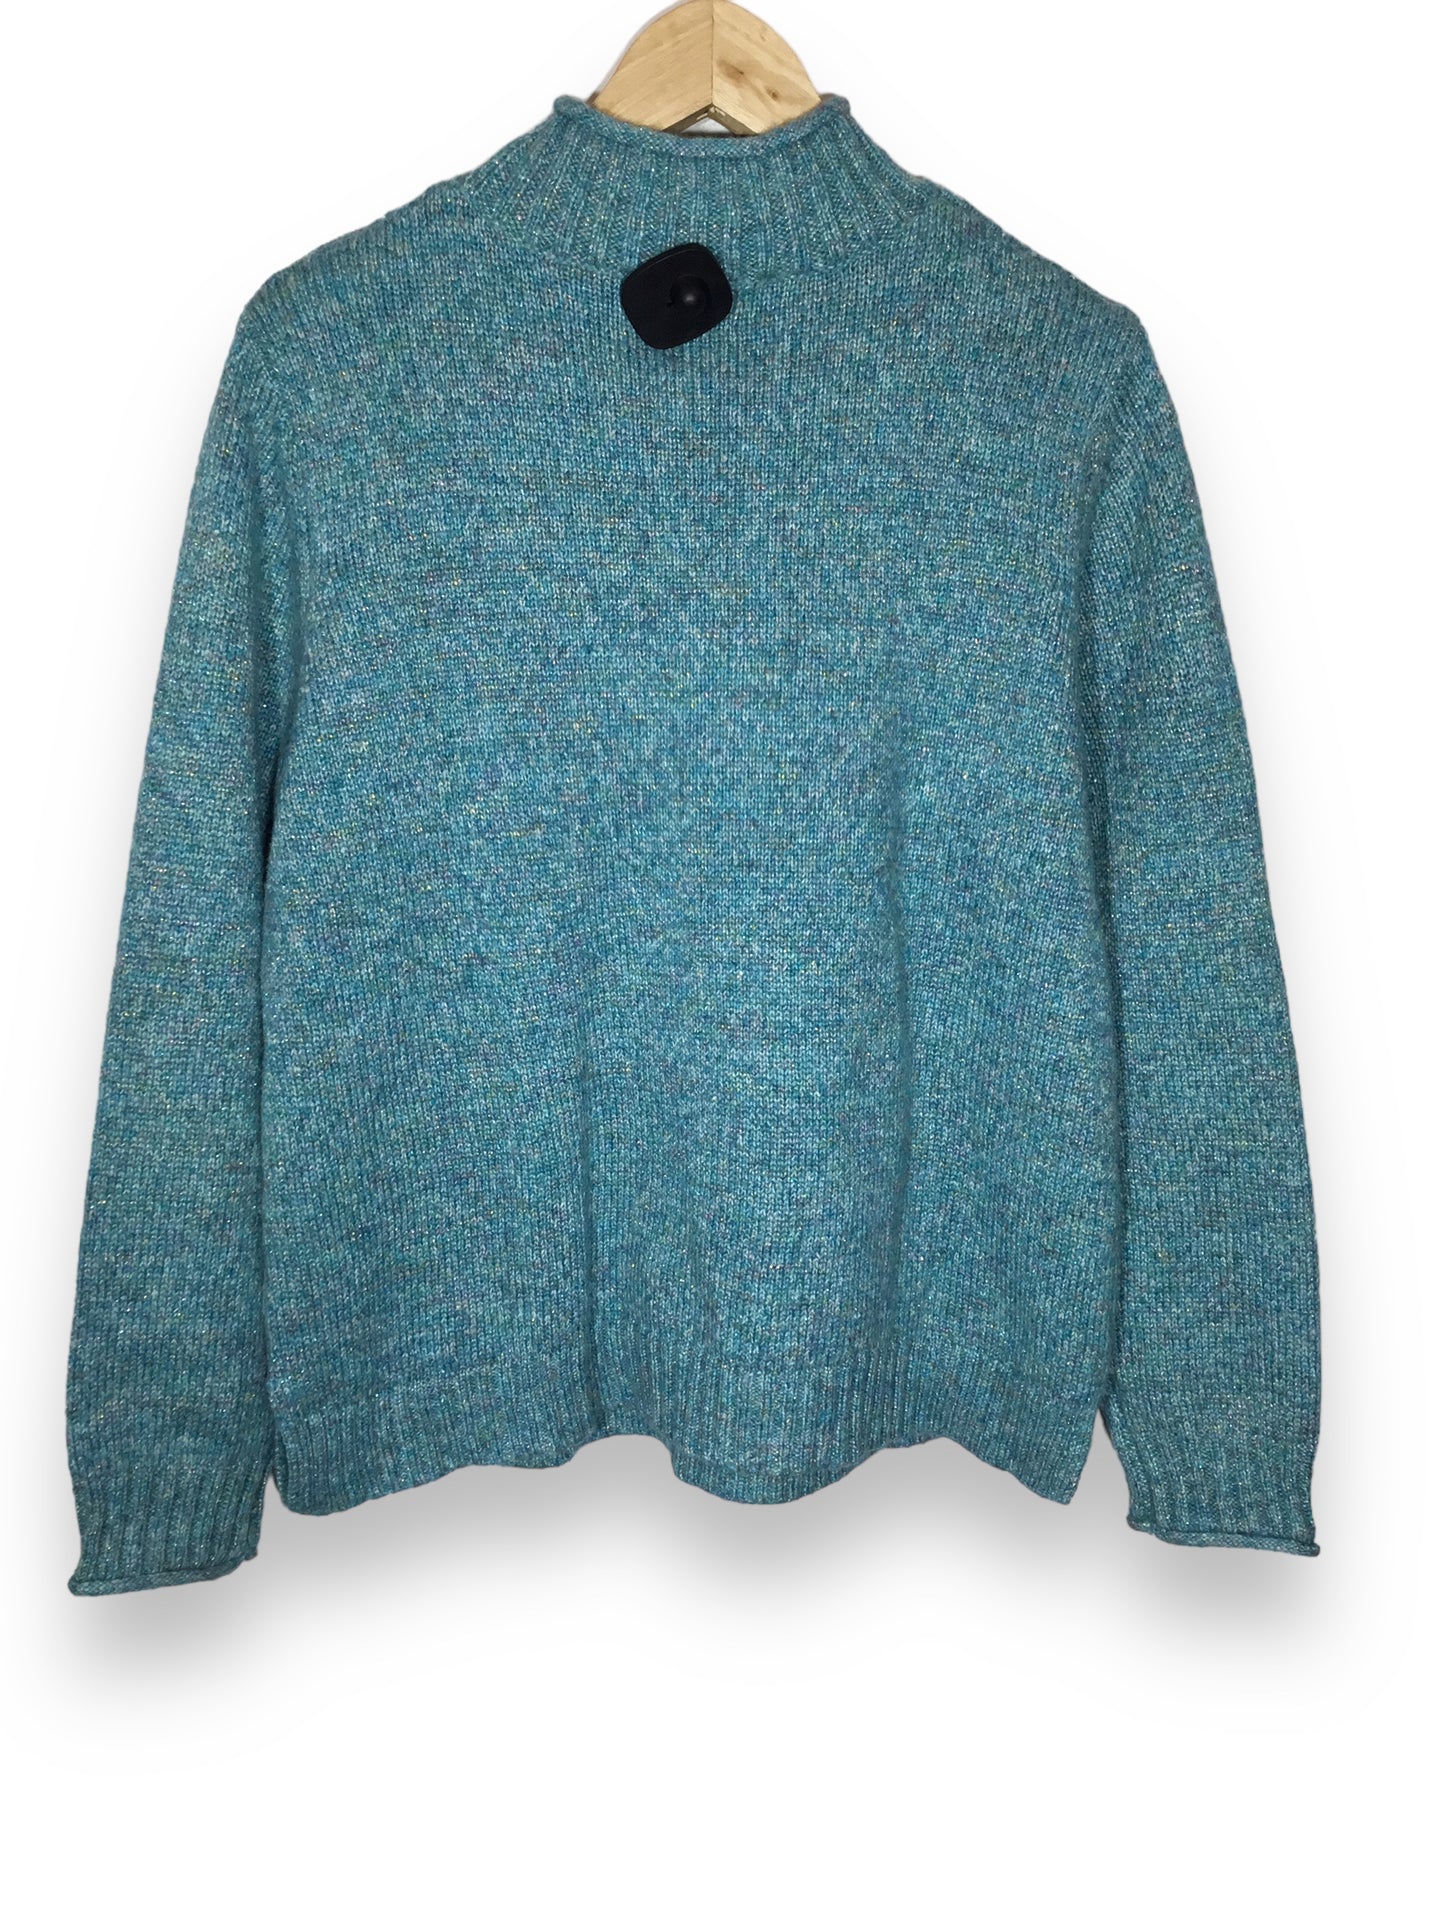 Sweater By Alfred Dunner  Size: M